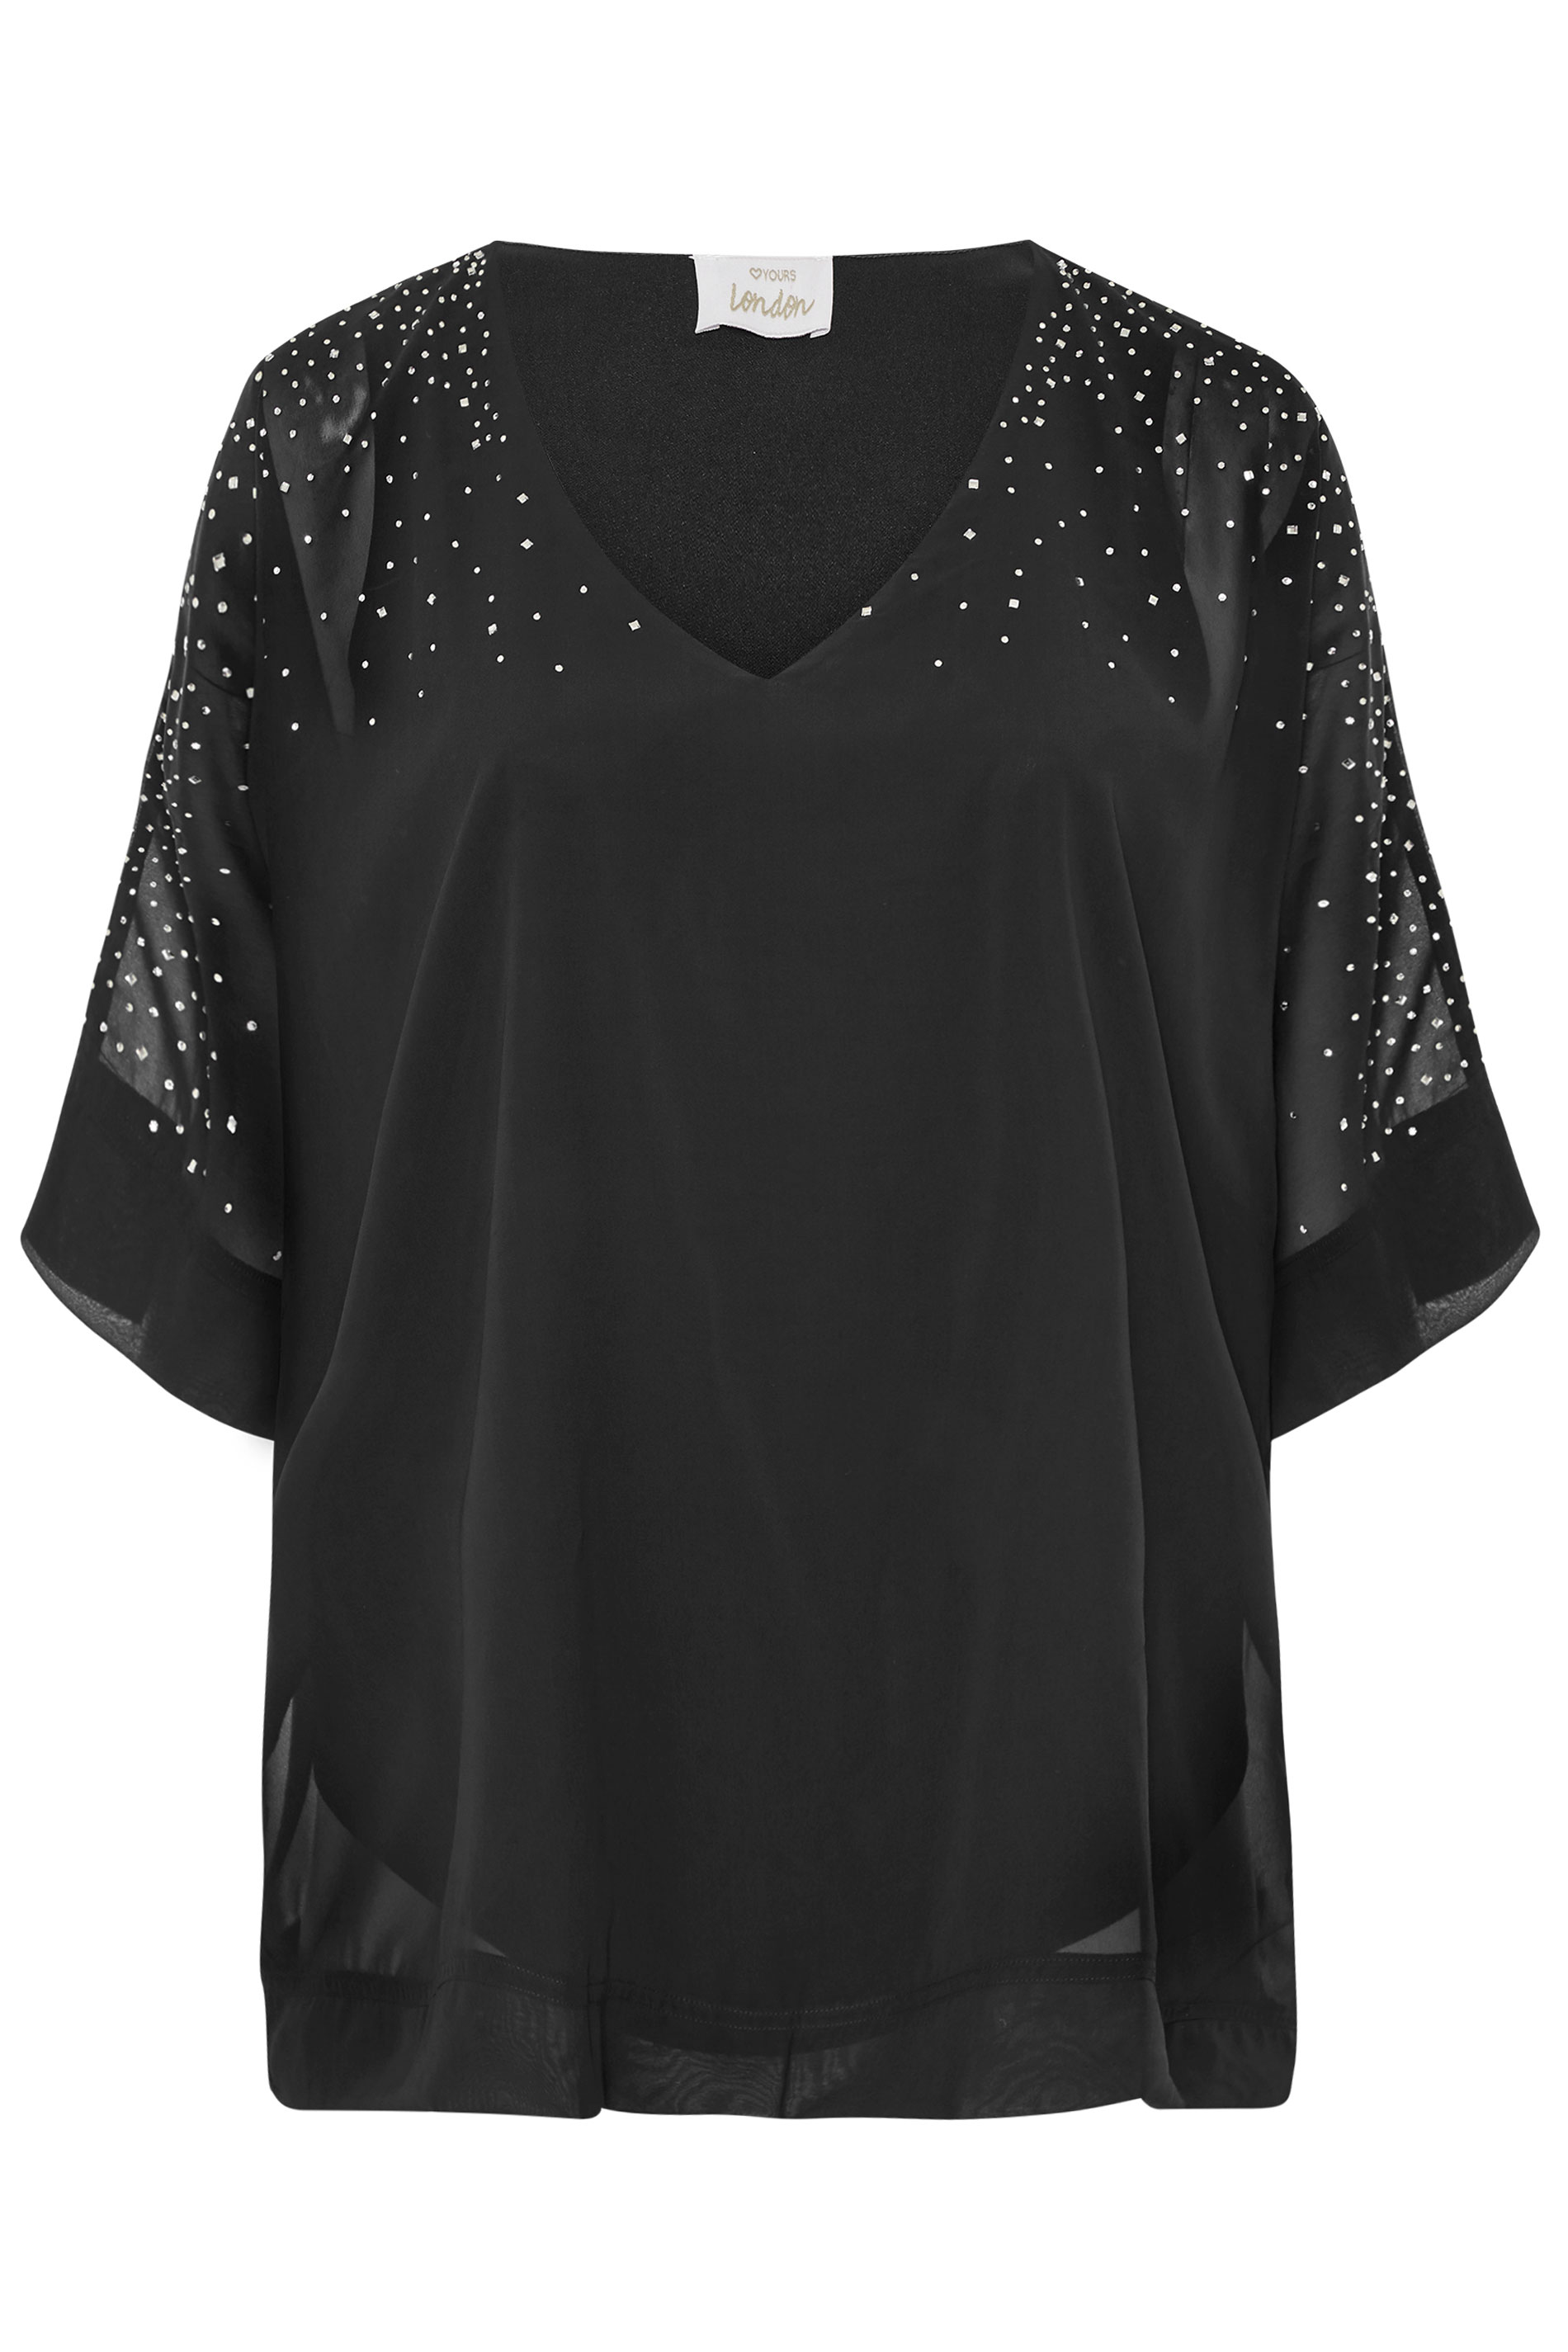 YOURS LONDON Black Diamante Chiffon Cape Top | Yours Clothing